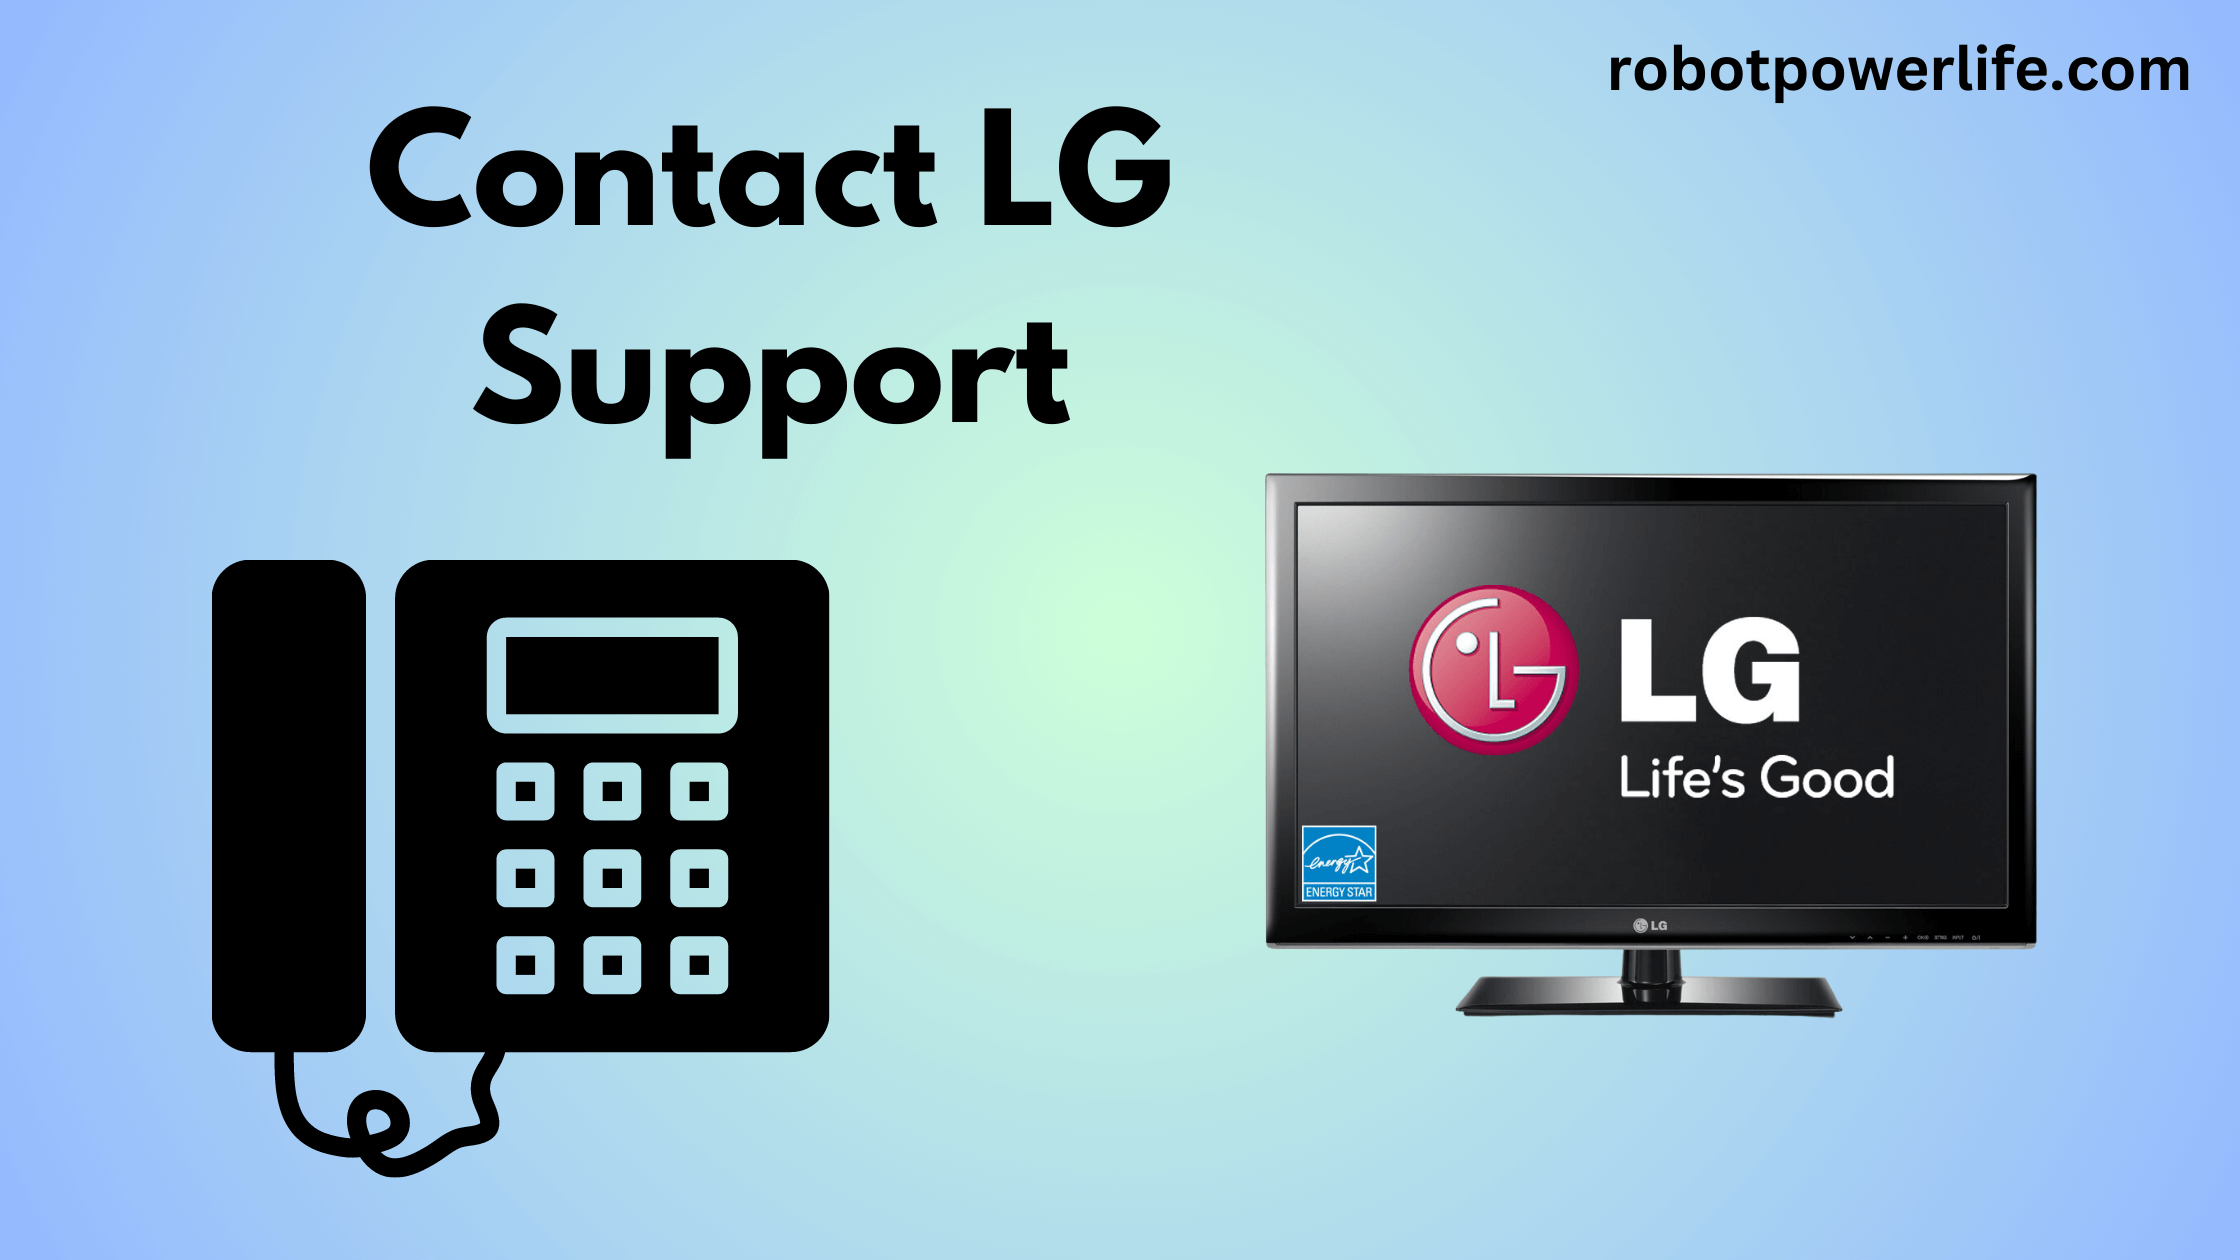 Contact LG Support